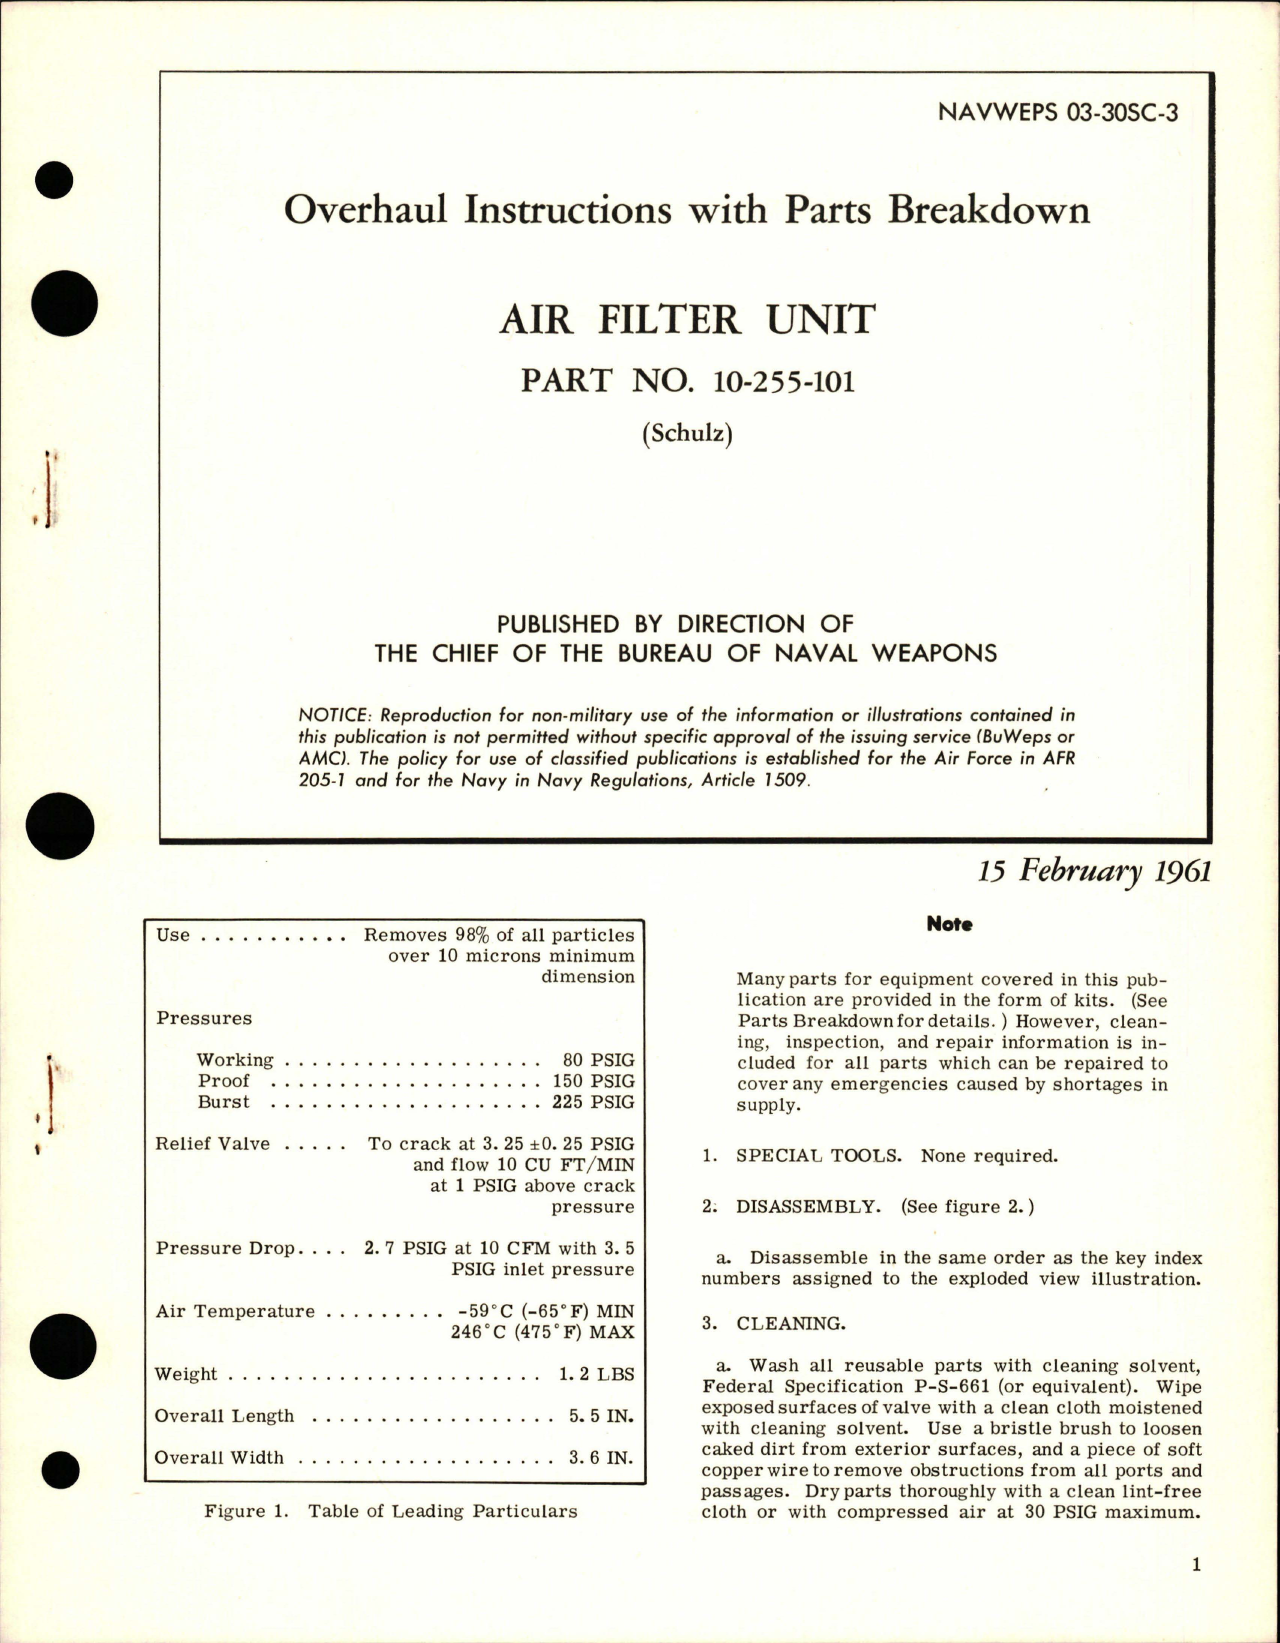 Sample page 1 from AirCorps Library document: Overhaul Instructions with Parts Breakdown for Air Filter Unit - Part 10-255-101